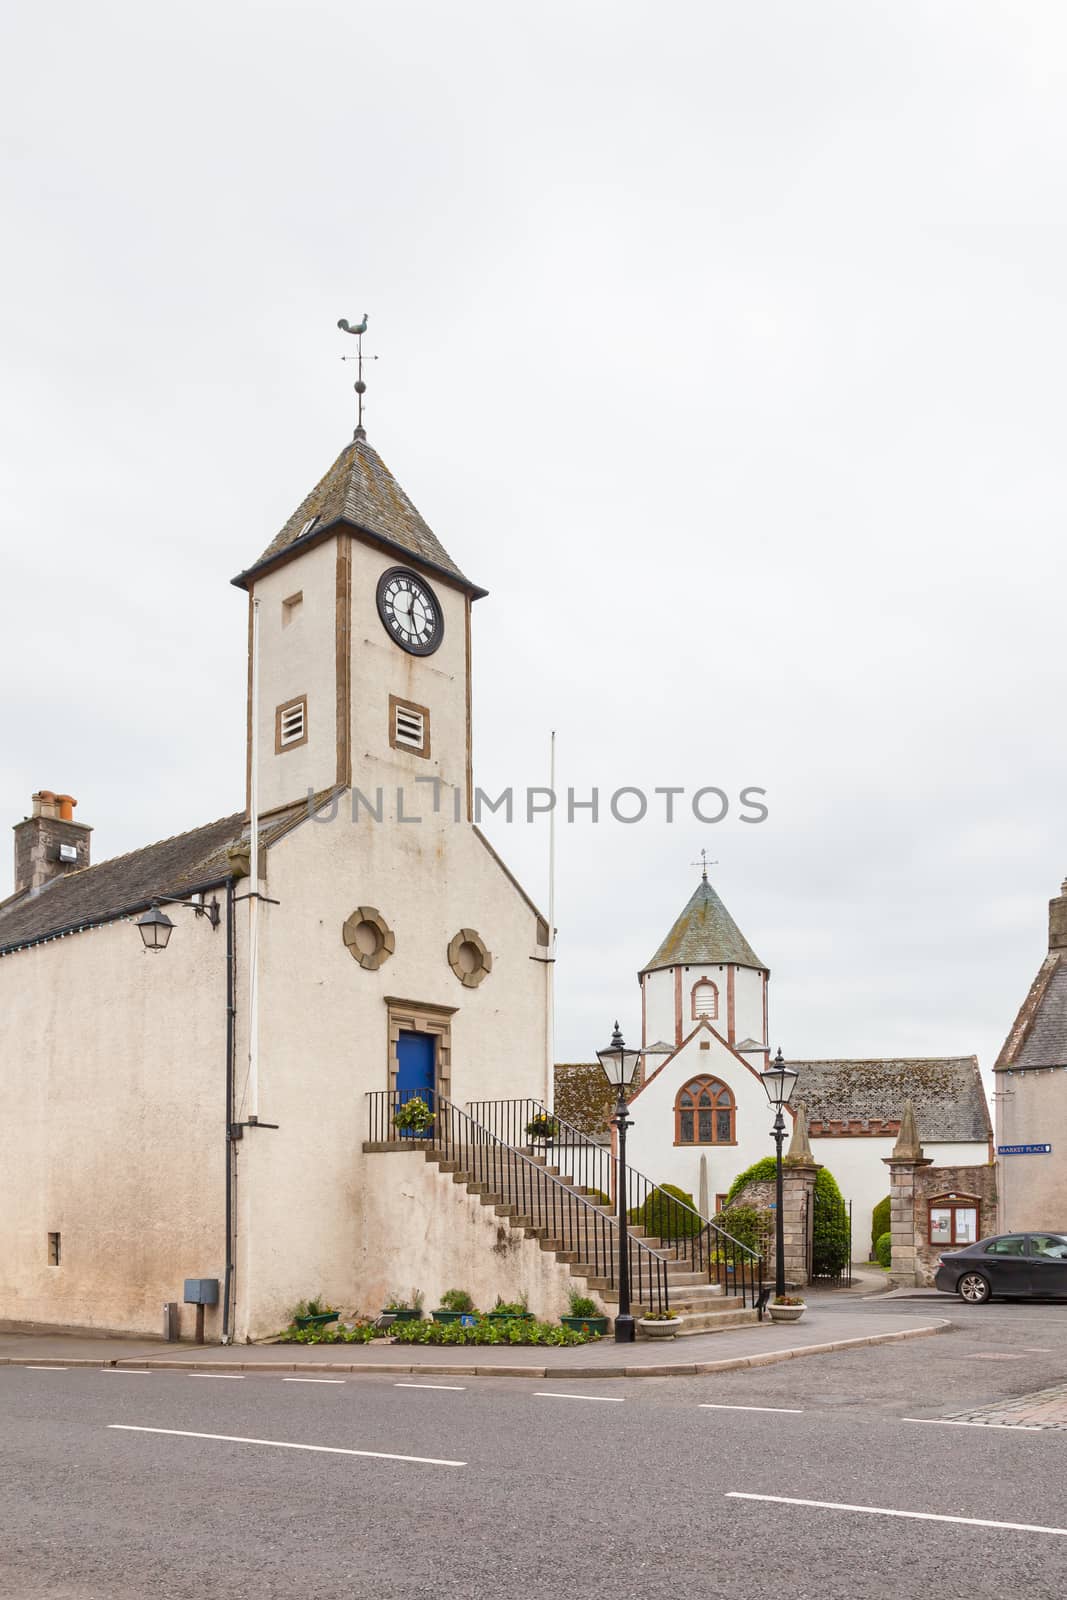 Lauder Town Hall, formerly a tollbooth, is pictured in Lauder town centre in the Scottish Borders.  Behind can be seen Lauder Old Parish Church.